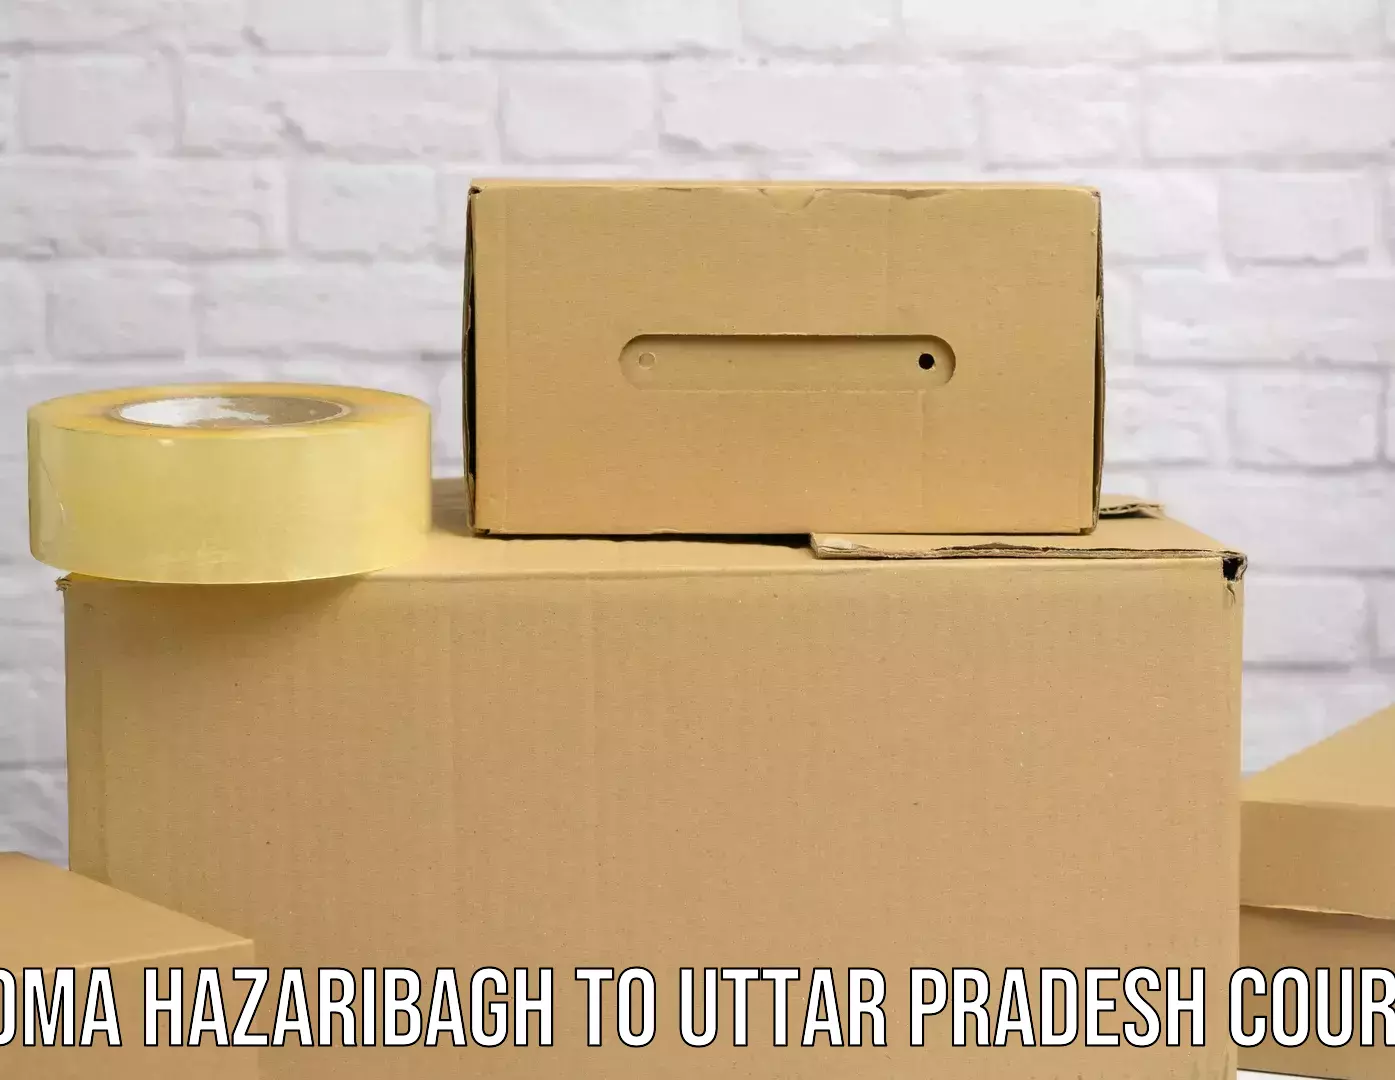 Round-the-clock parcel delivery Padma Hazaribagh to Lalitpur